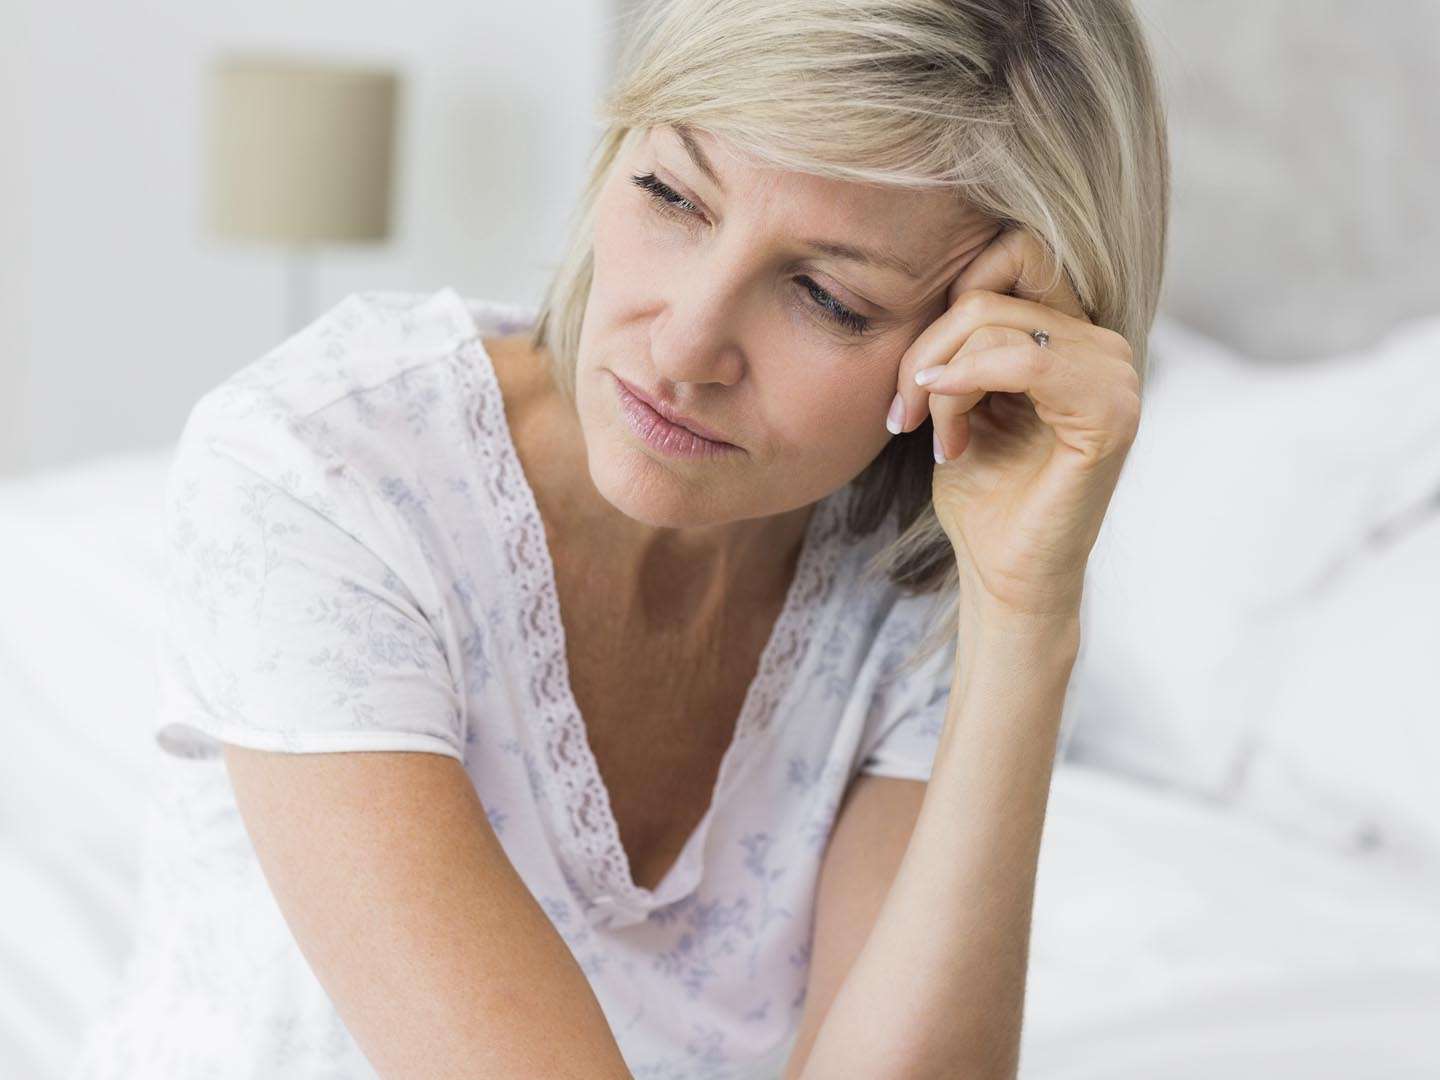 Do Hot Flashes Cause Depression?